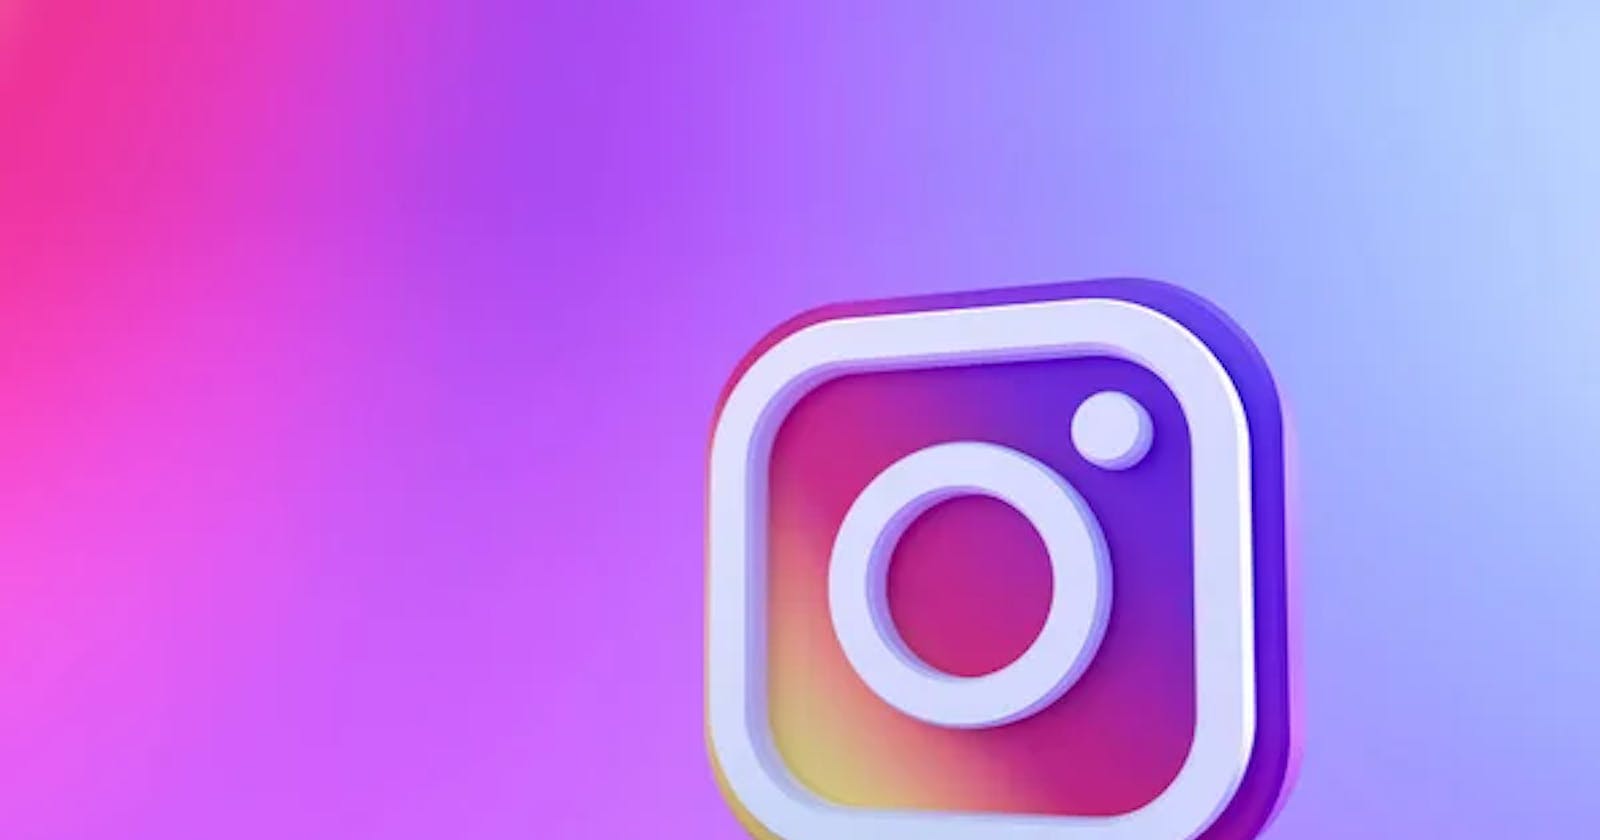 Deleting Your Instagram Account? Here's How To Get Rid Of The Data Instagram Has About You